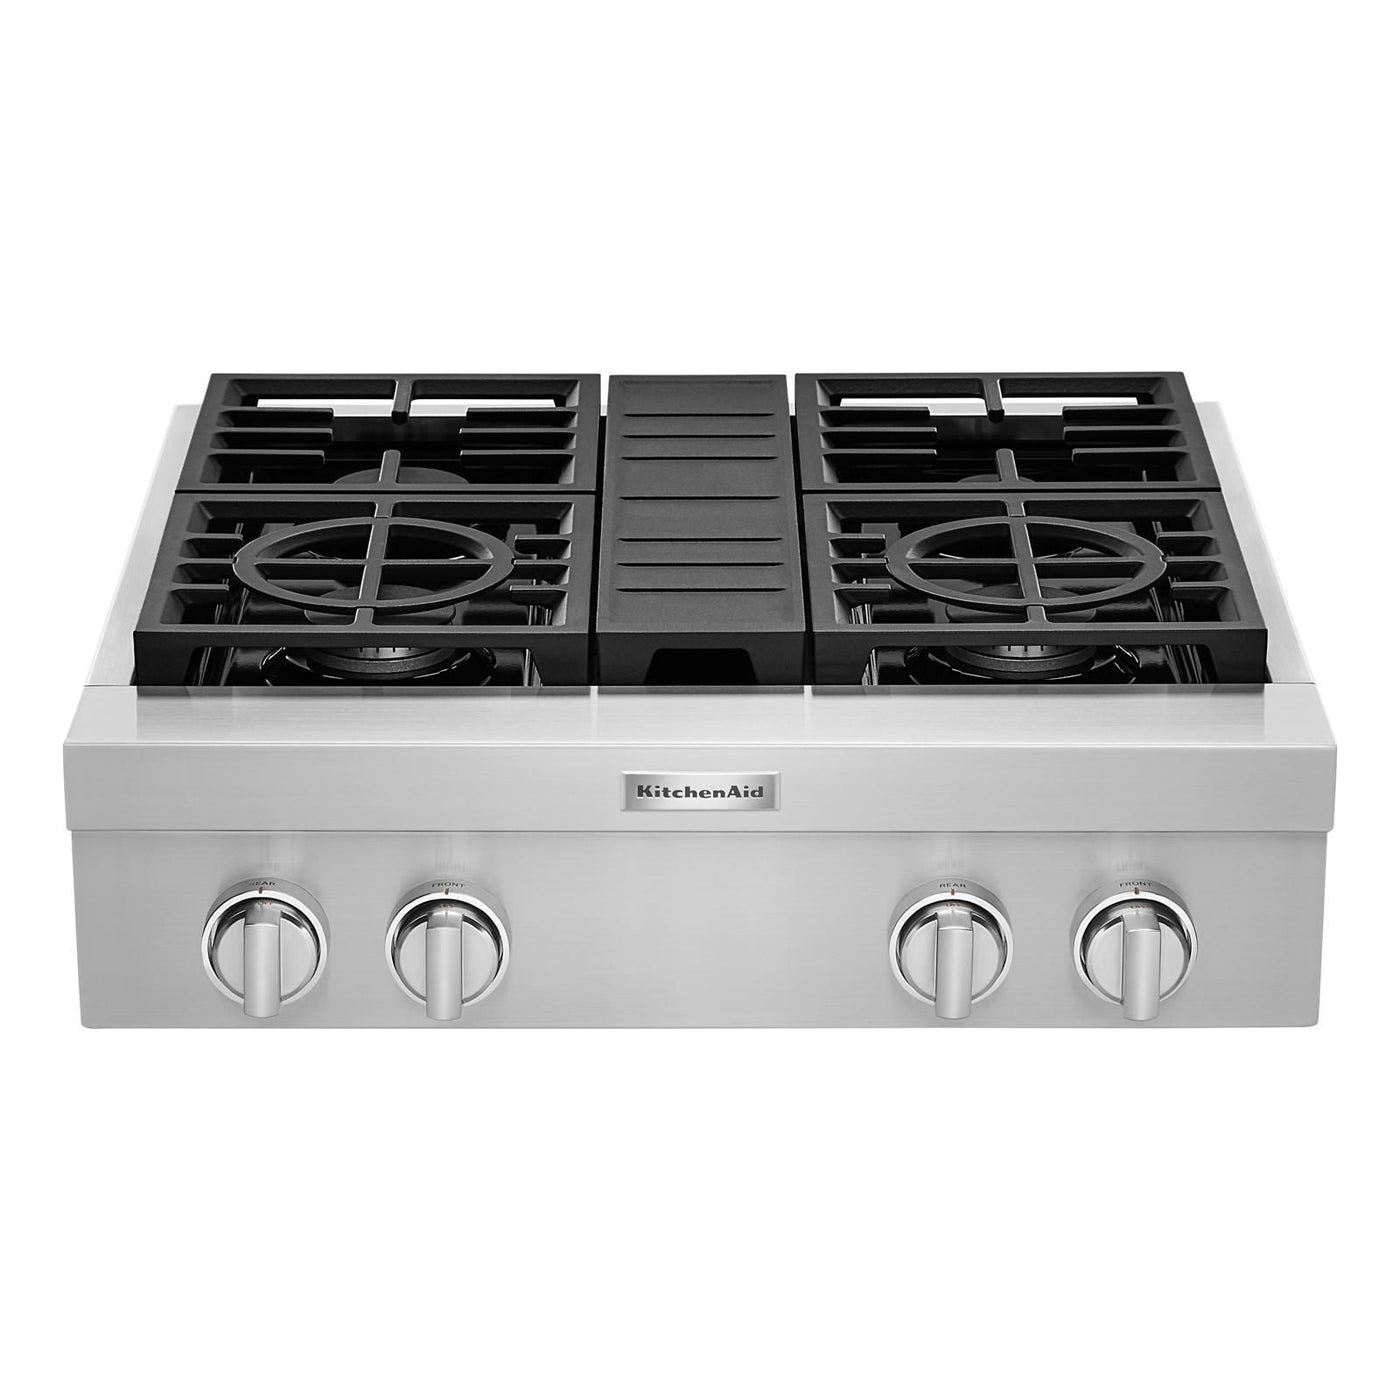 KitchenAid Stainless Steel 30" Commercial Gas Cooktop - KCGC500JSS